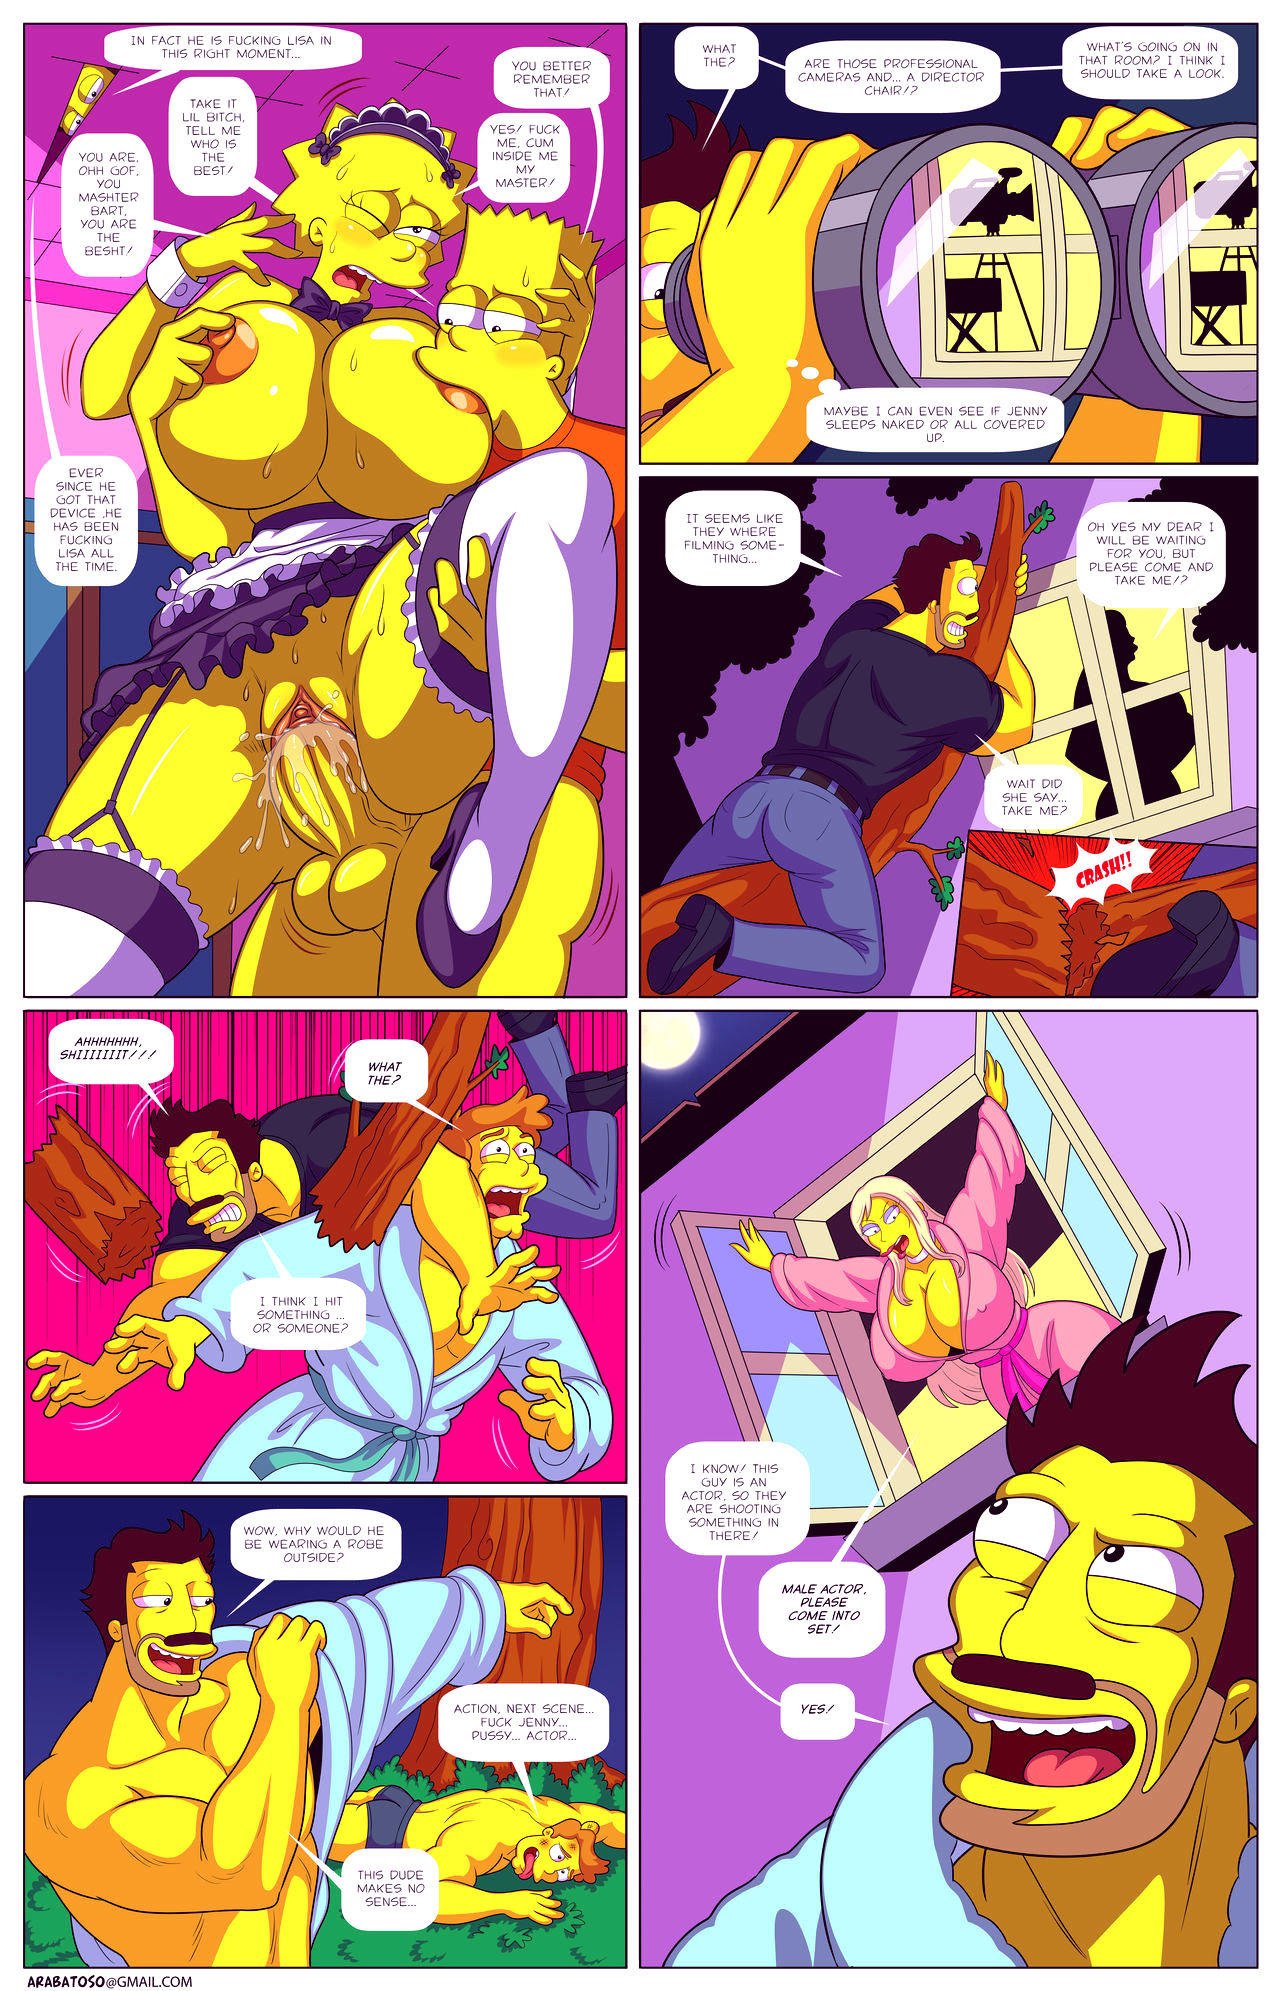 Darrens adventure or welcome to springfield porn comic picture 42